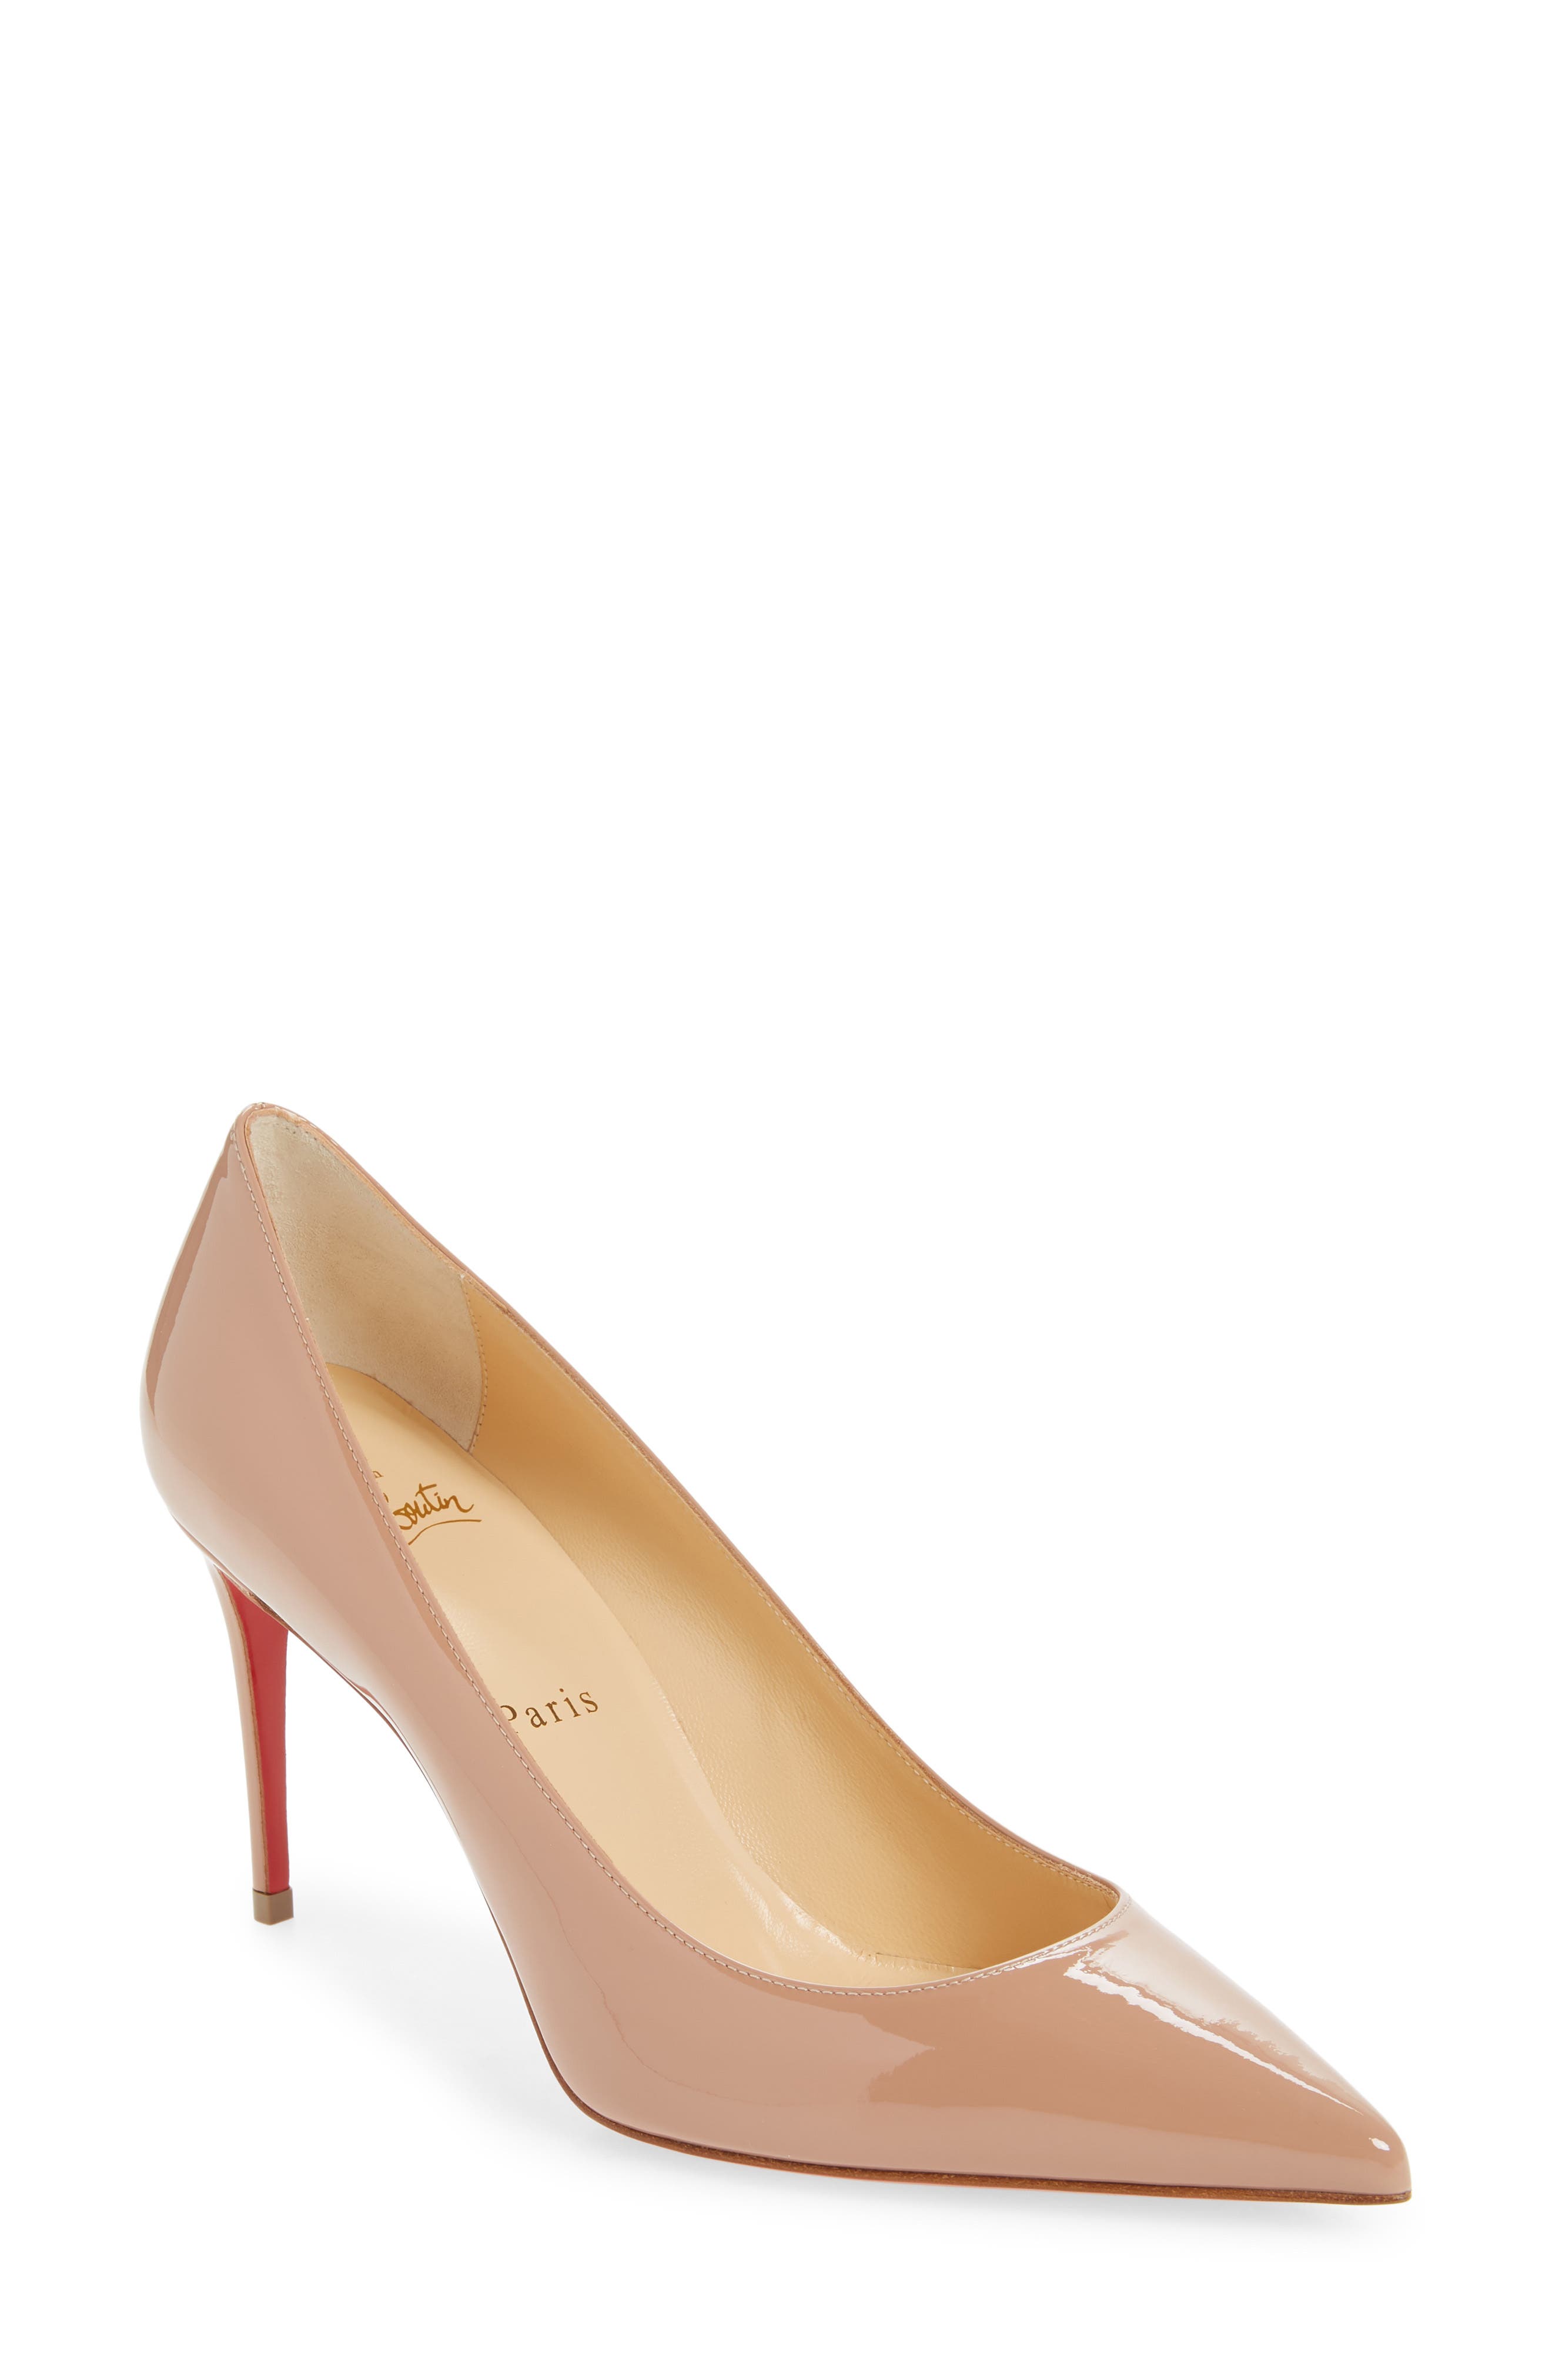 Christian Louboutin Kate Pointed Toe Patent Leather Pump in Nude at Nordstrom, Size 10Us